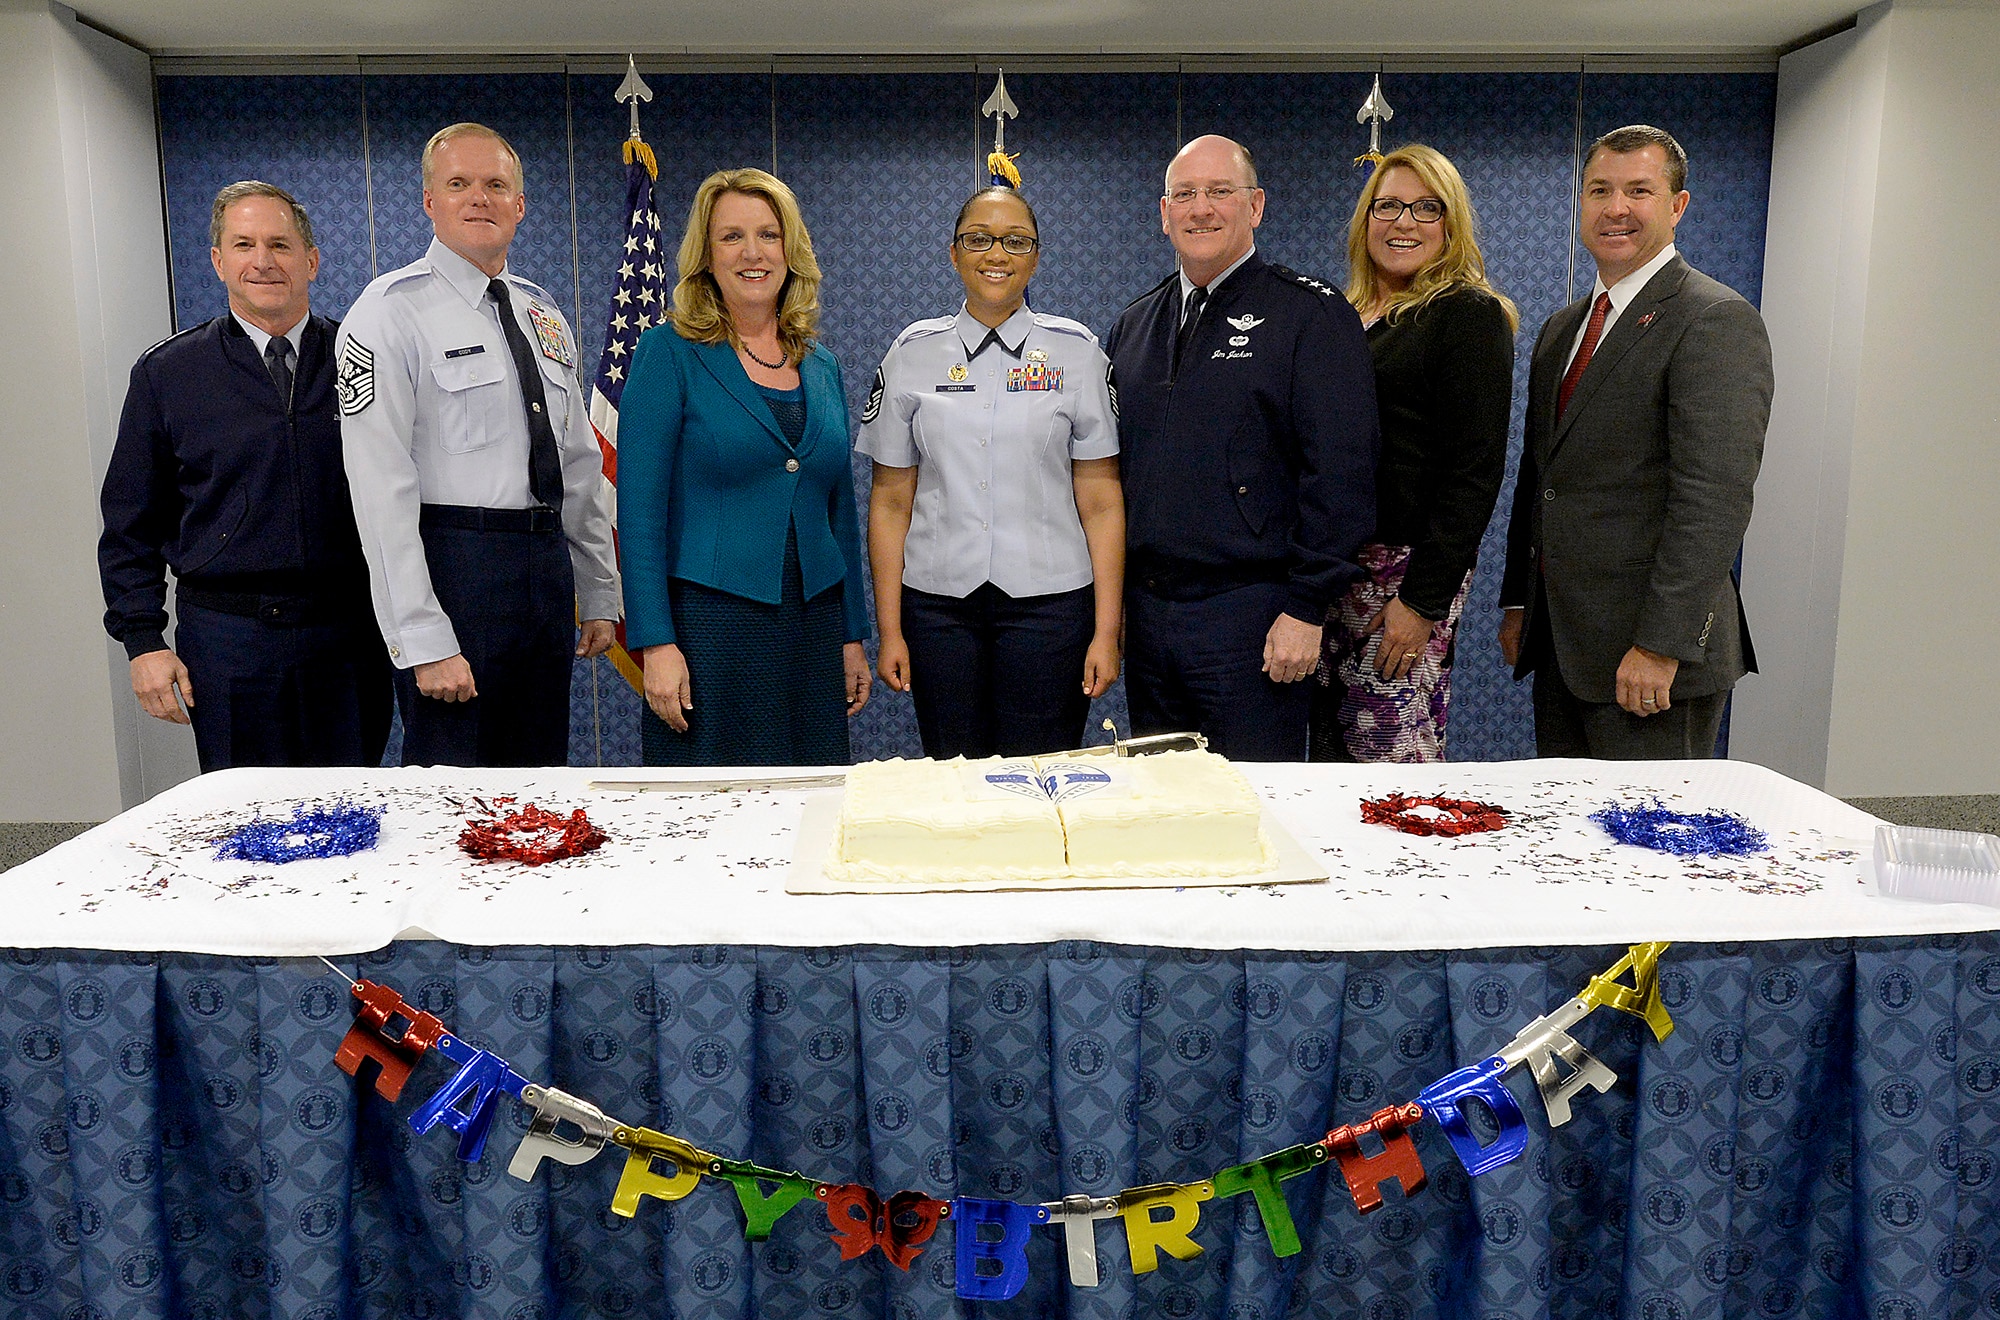 Celebrating the Air Force Reserve's 68th birthday during a Pentagon ceremony April 14, 2016, are, from left, Air Force Vice Chief of Staff Gen. David Goldfein; Chief Master Sgt. of the Air Force James A. Cody; Air Force Secretary Deborah Lee James; Master Sgt. Kandi Costa; Lt. Gen. James F. Jackson, the Air Force Reserve chief and commander of Air Force Reserve Command; radio personality Delilah; and Brian Ford. Delilah and Ford are civic leaders for Air Force Reserve Command. (U.S. Air Force photo/Scott M. Ash)